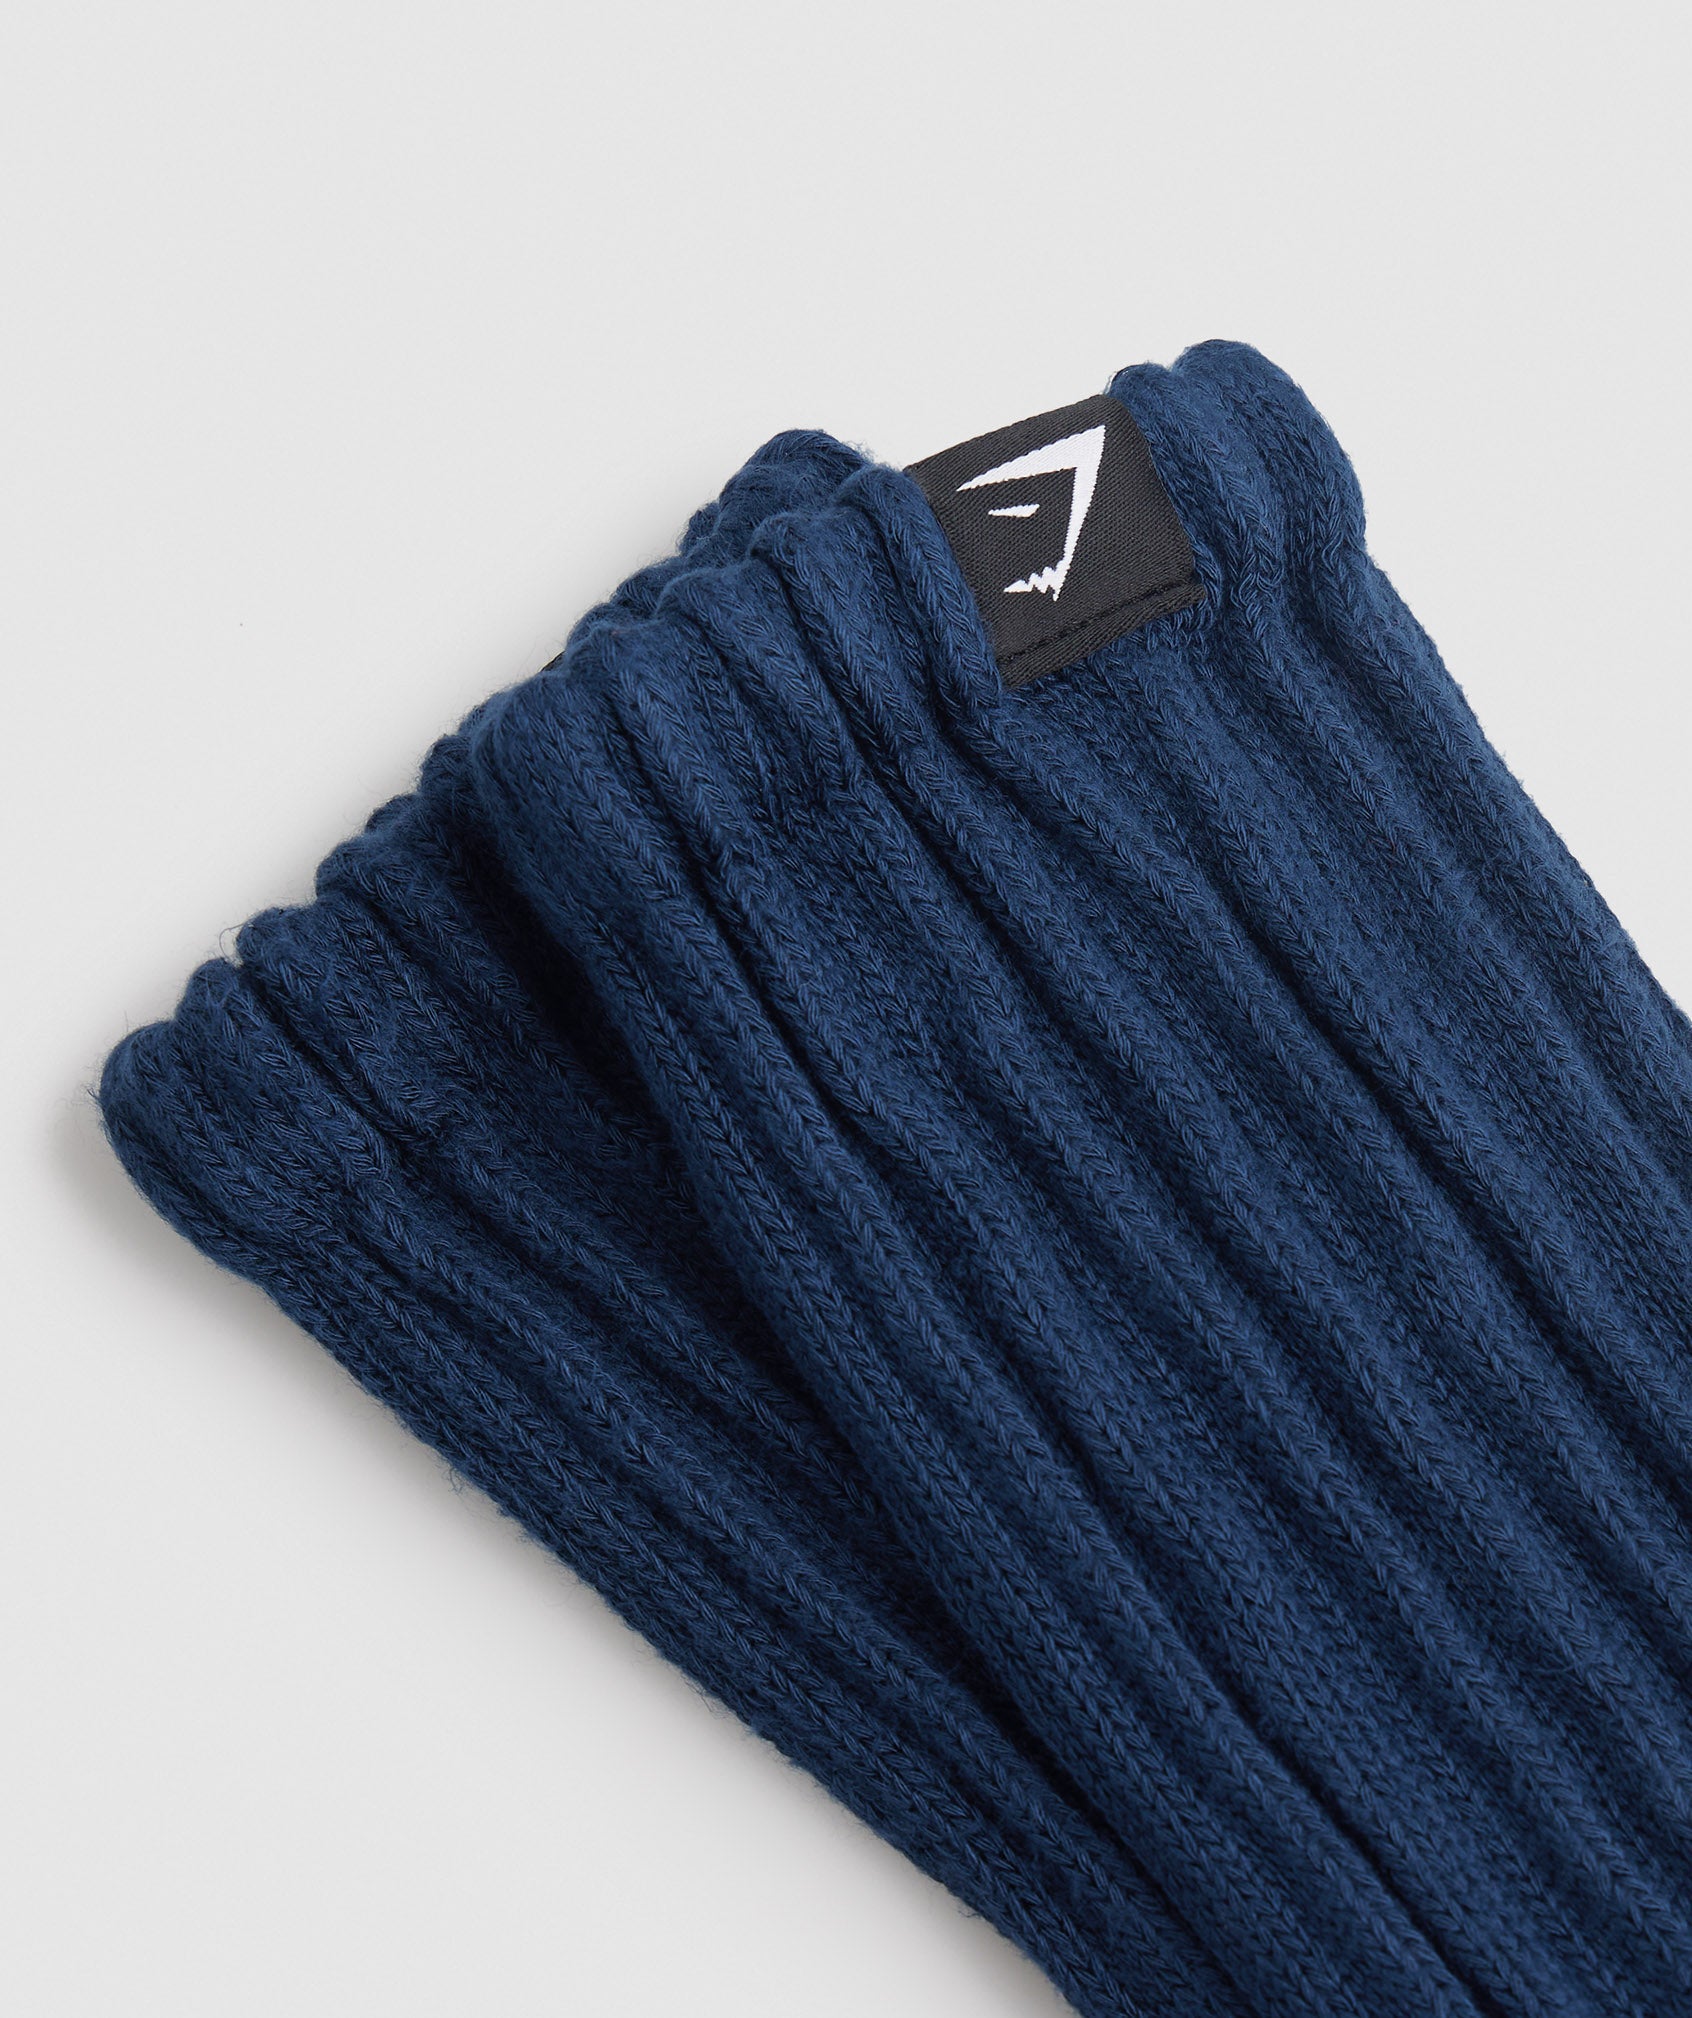 Comfy Rest Day Socks in Navy